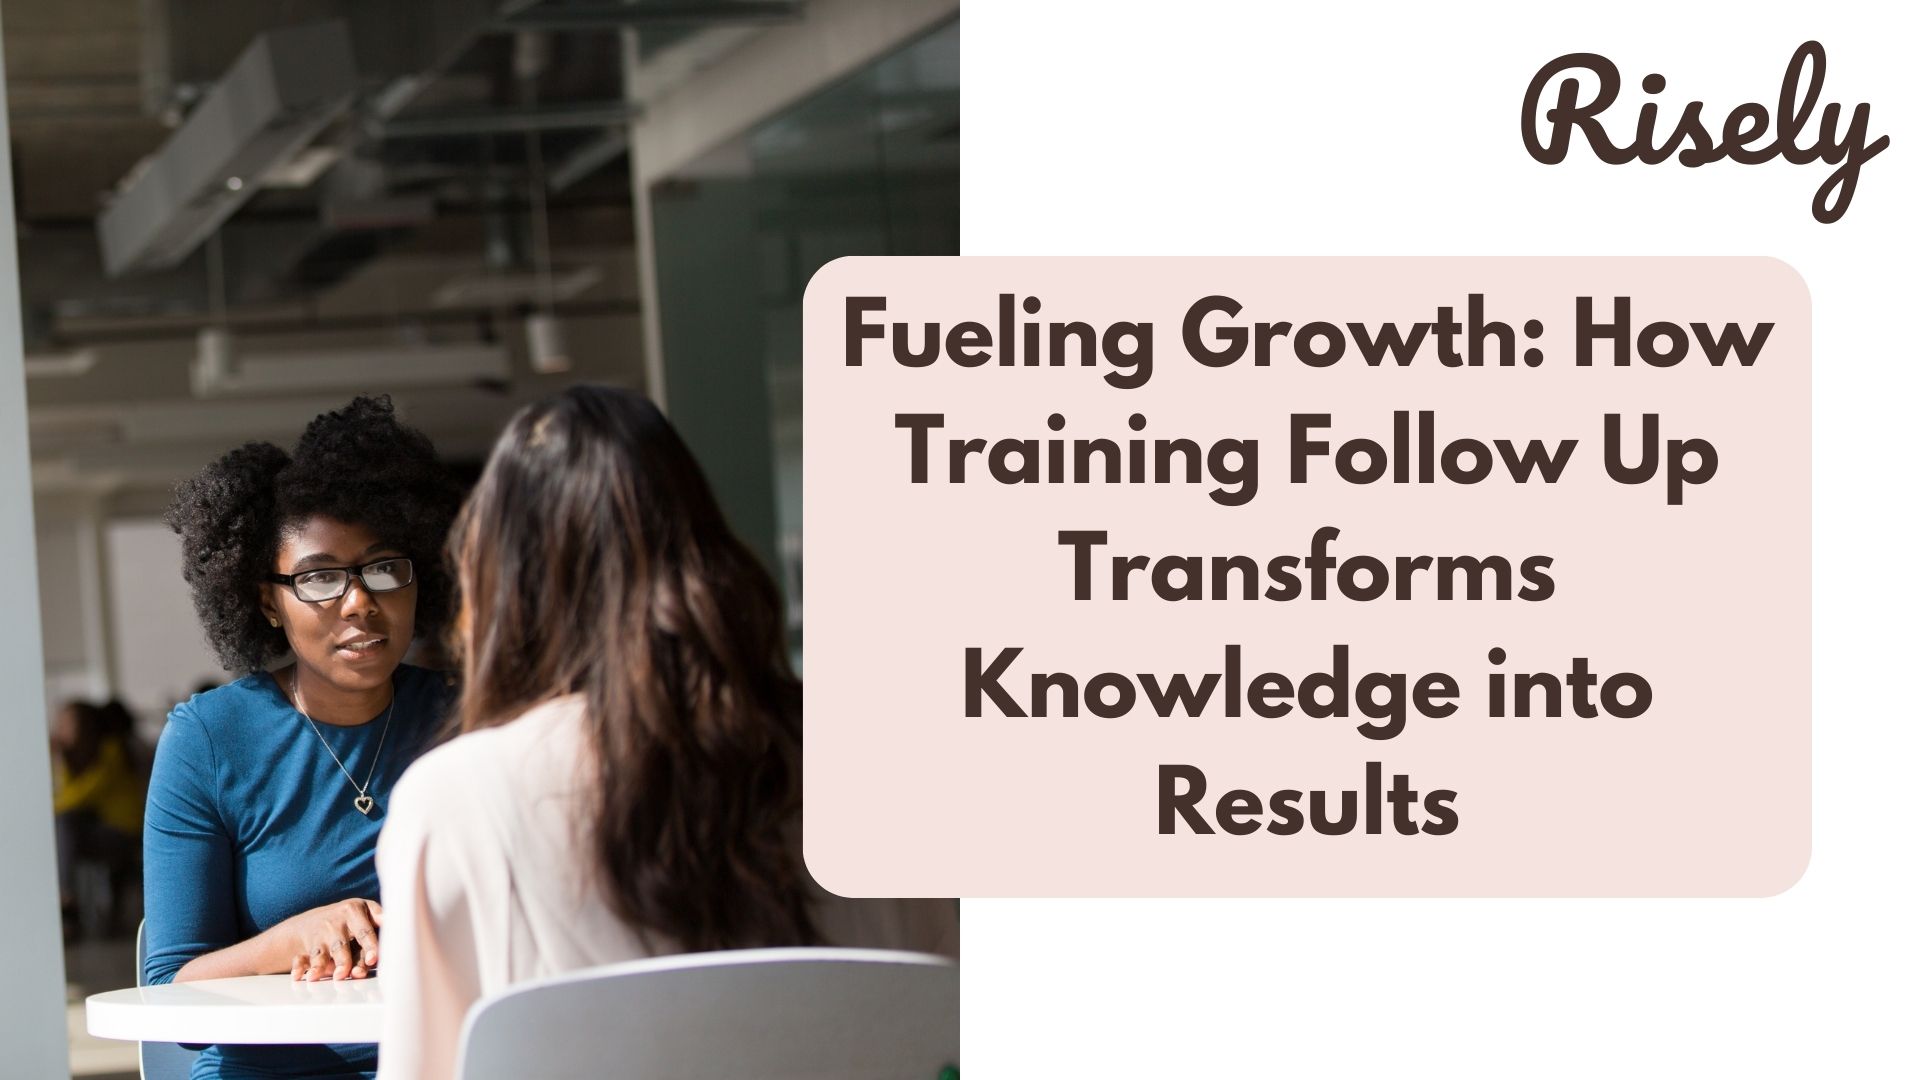 Fueling Growth: How Training Follow Up Transforms Knowledge into Results